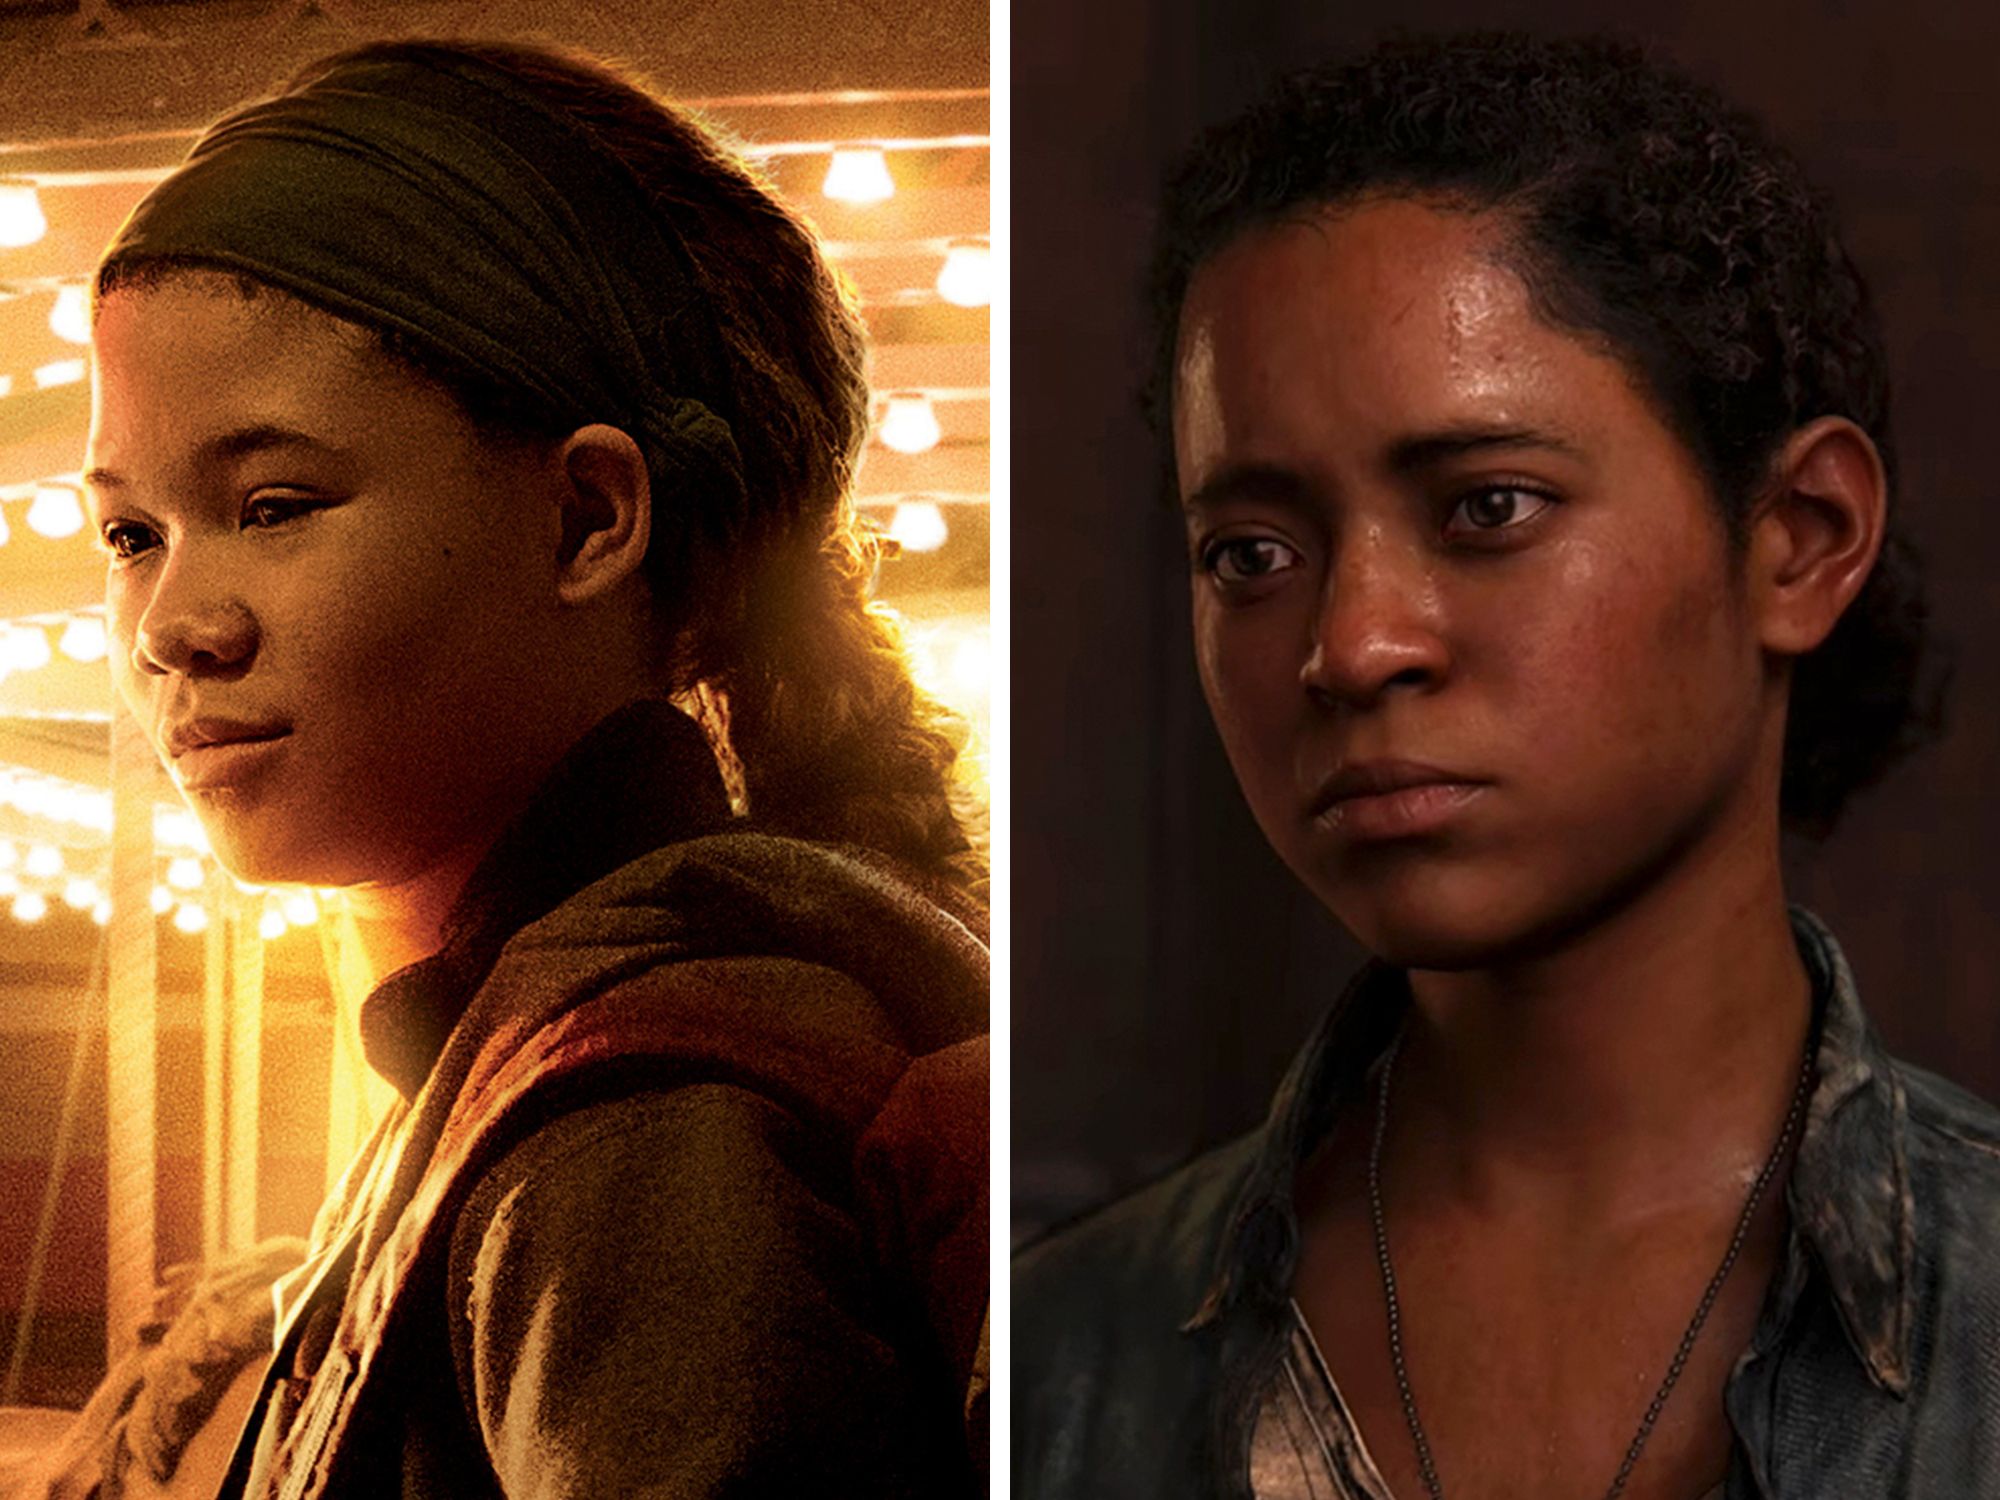 How the Premiere of The Last of Us Differed From the Video Game